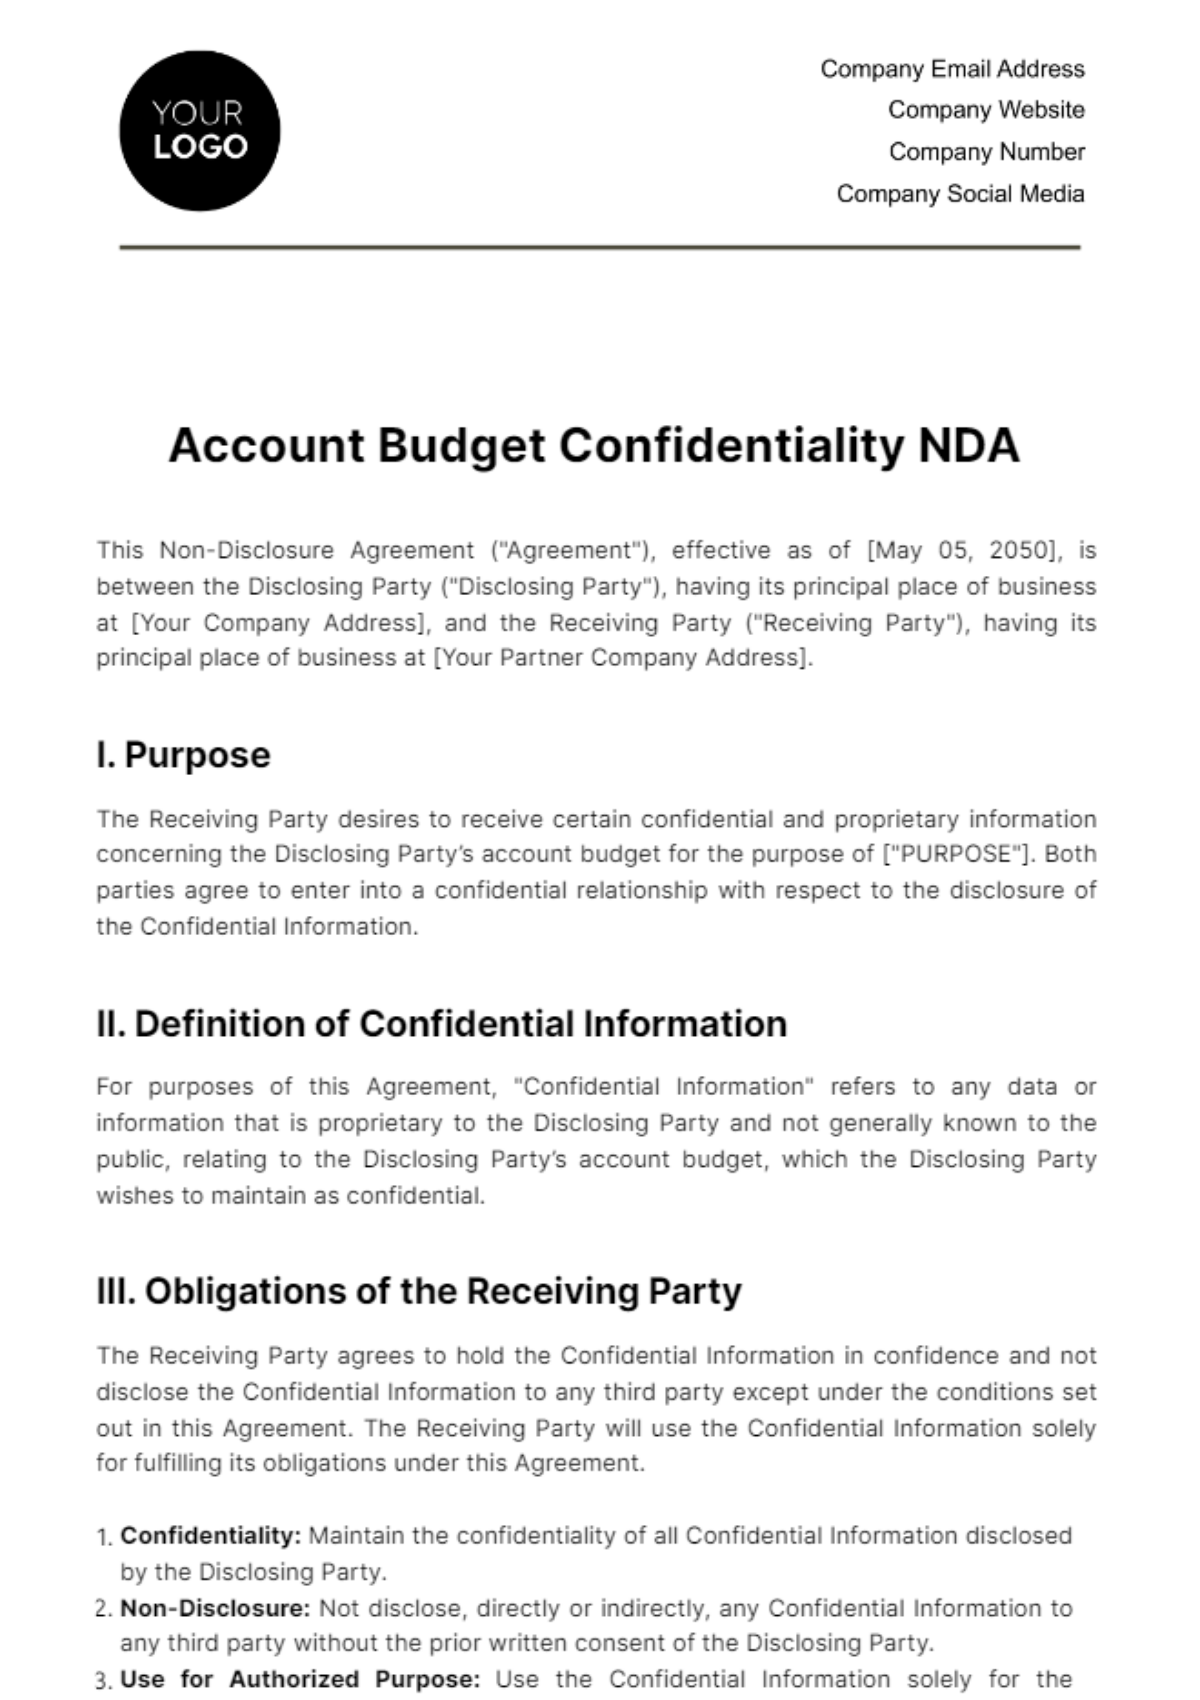 Account Budget Confidentiality NDA Template